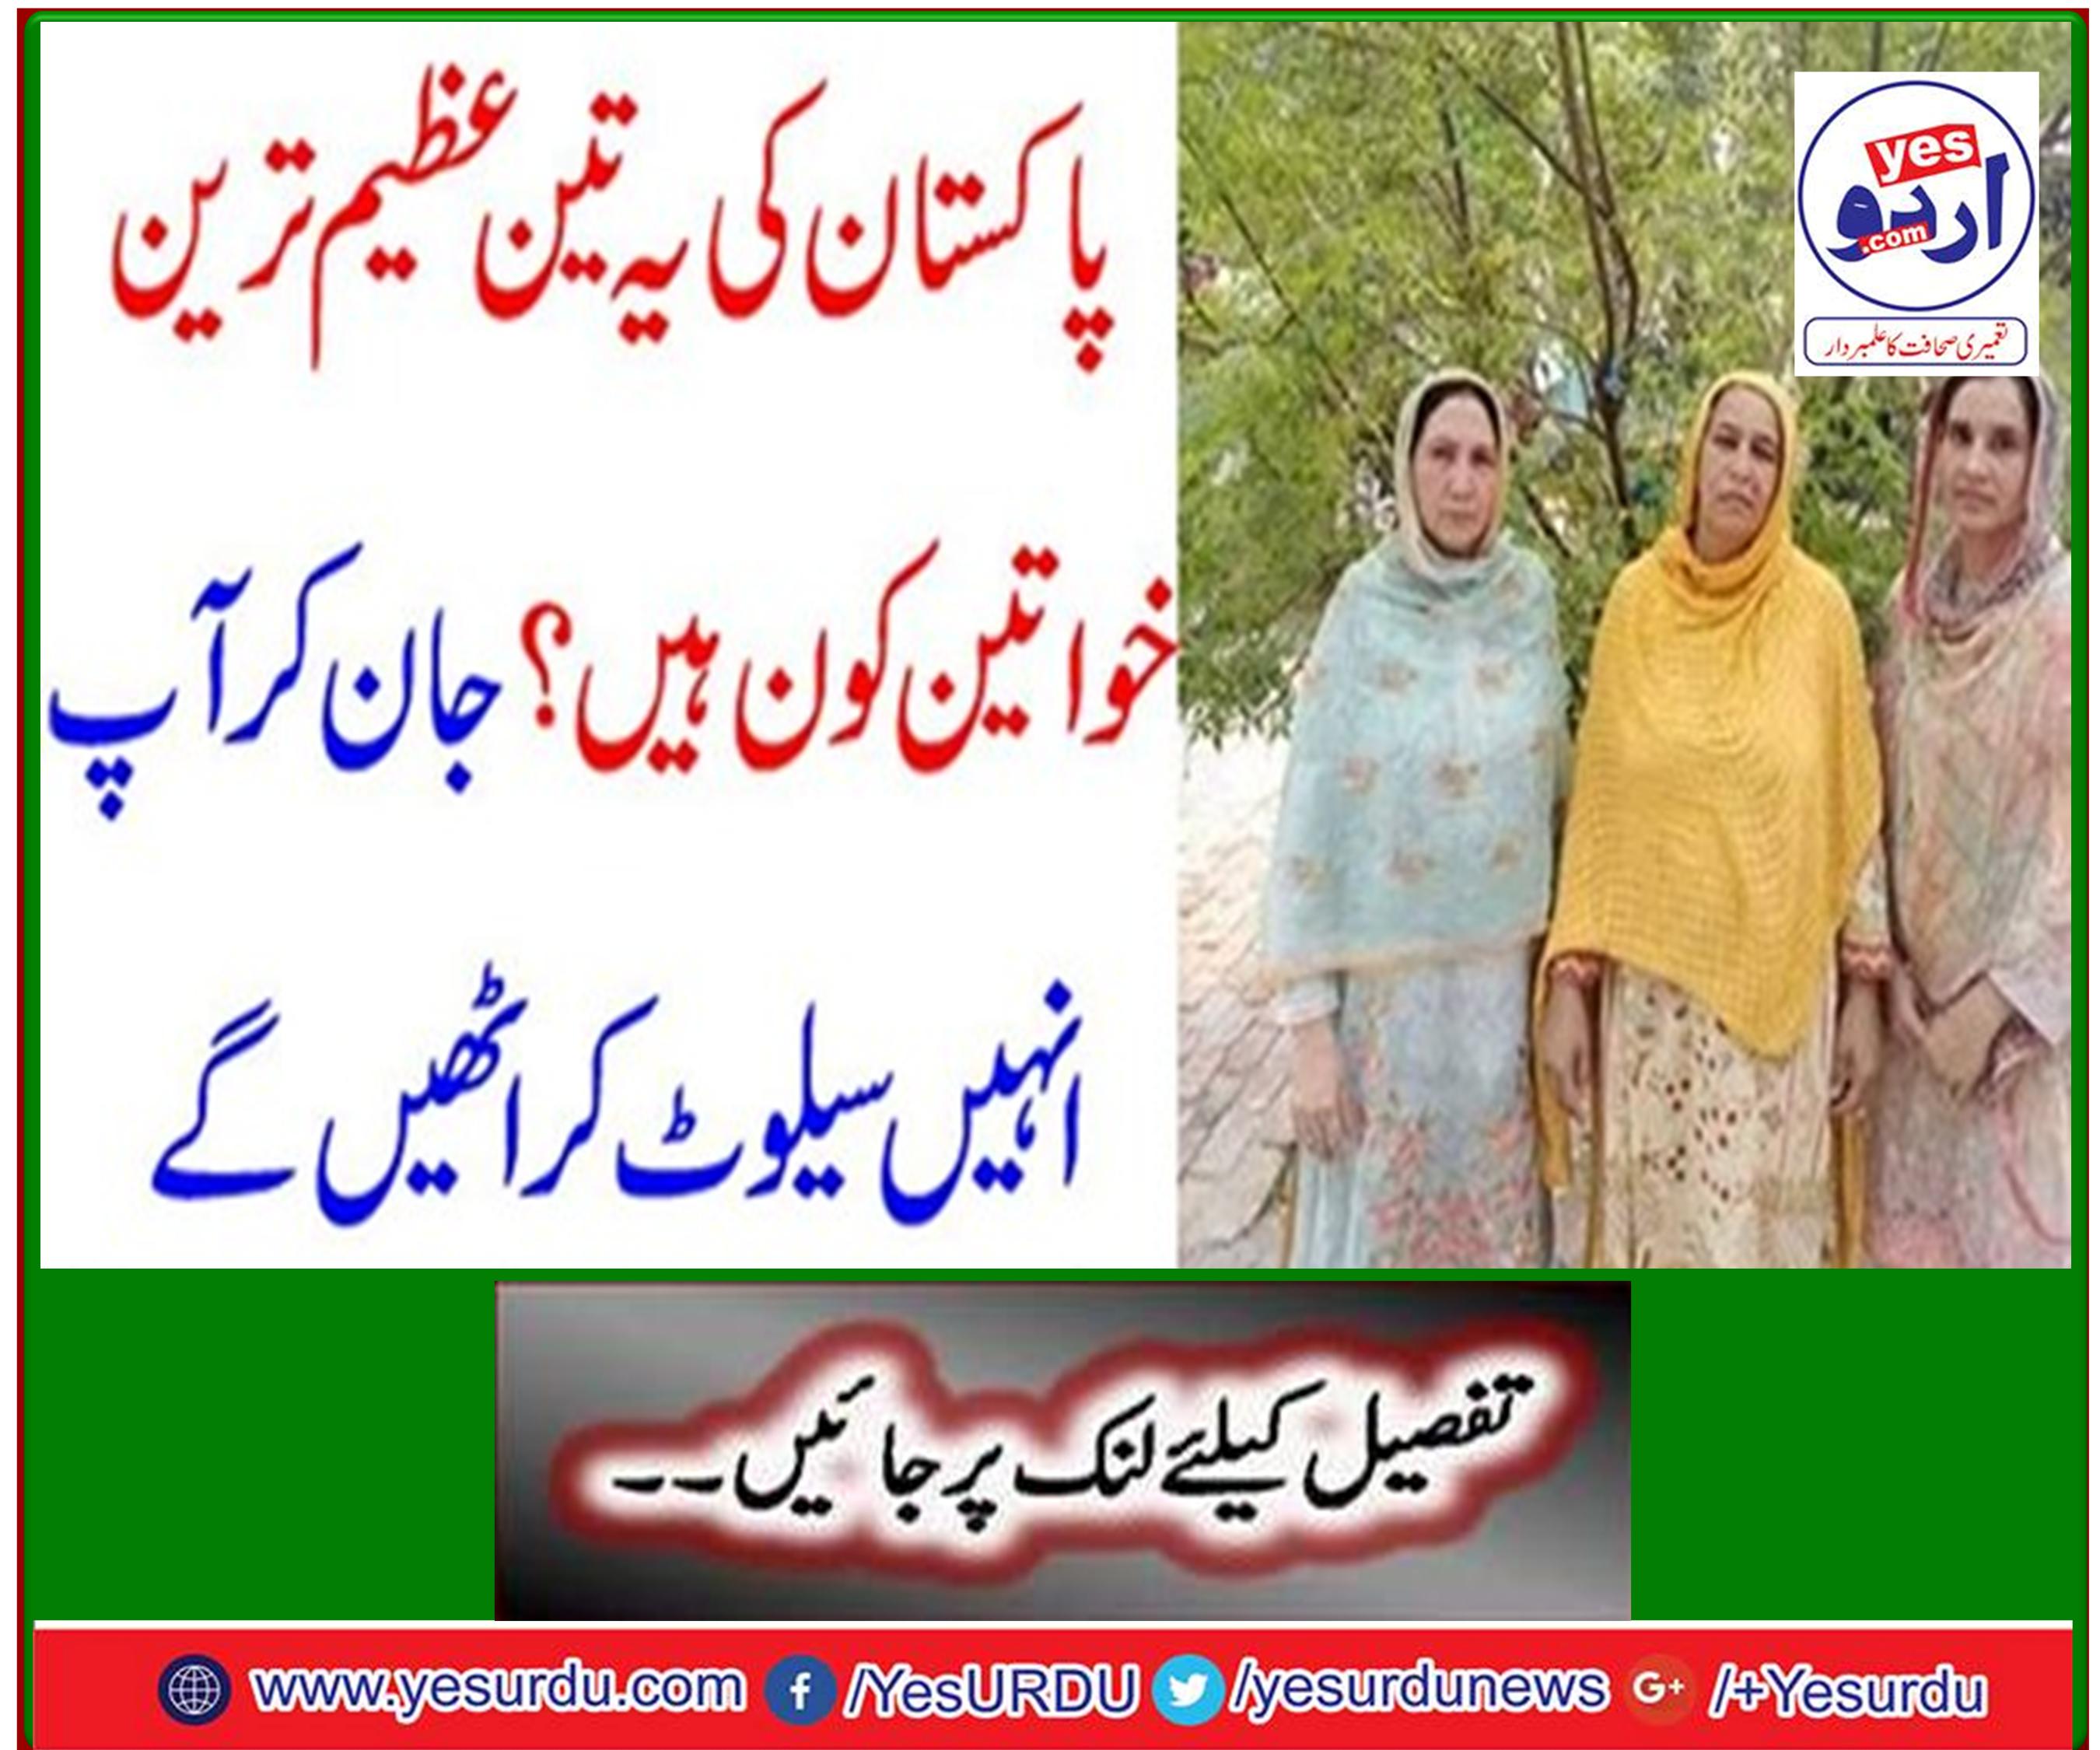 Who are the three greatest women in Pakistan? Knowing you will get them selved